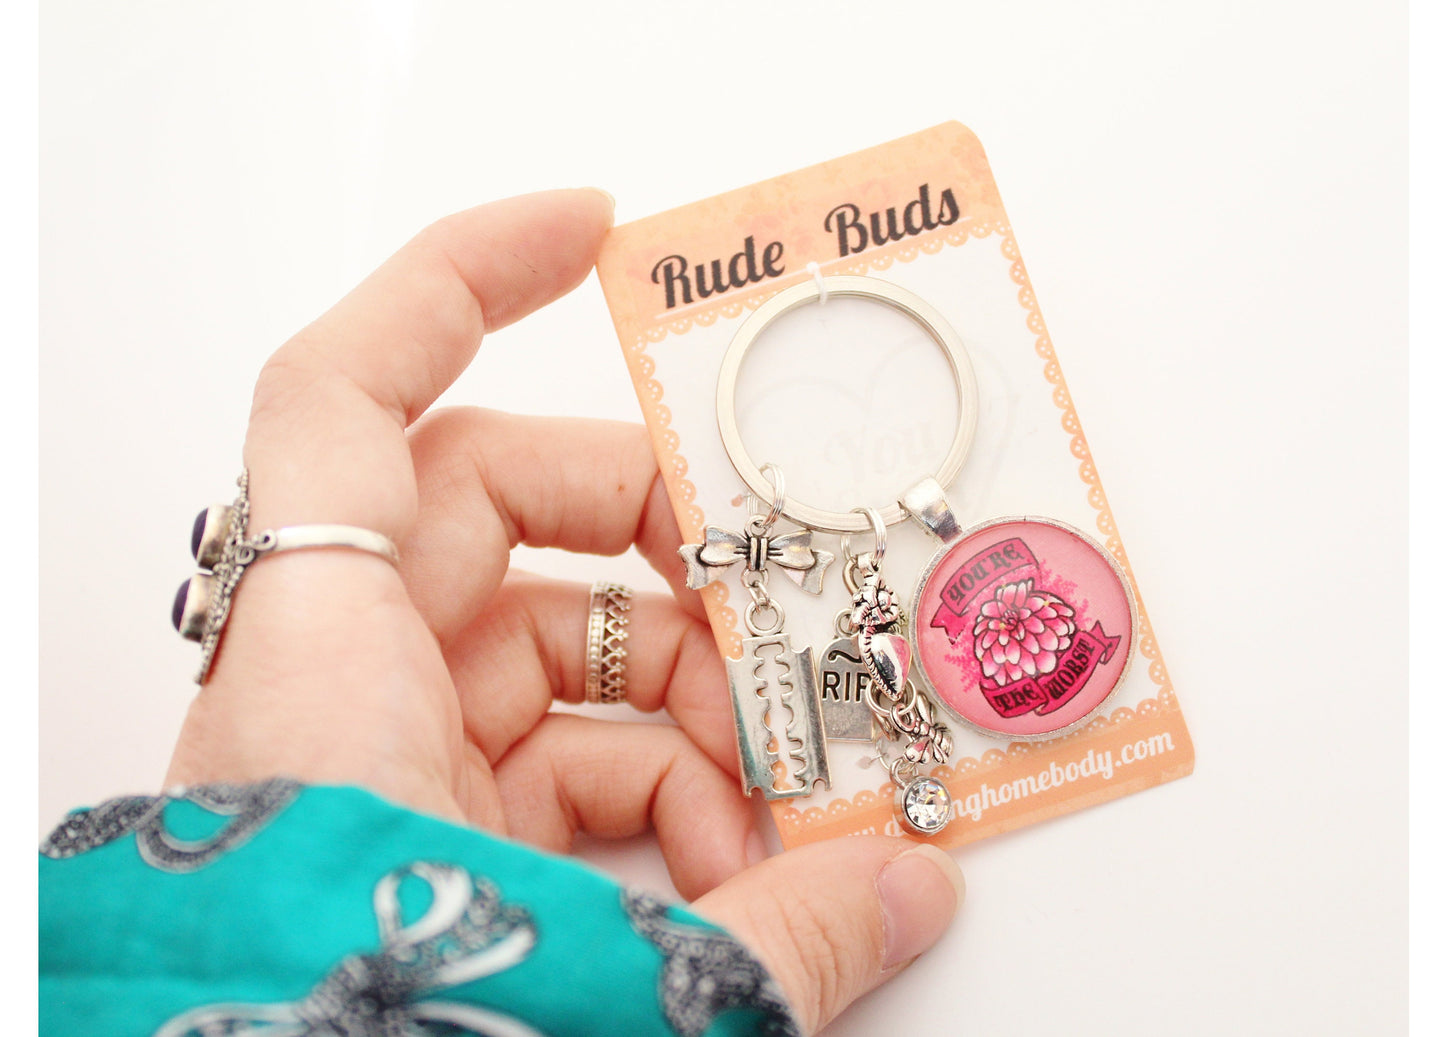 Youre The Worst Rude Buds Key Chain. Sarcastic Flower Keychains for Women. Funny Feminist Accessory. Pink Pastel Goth Keychain Charm.